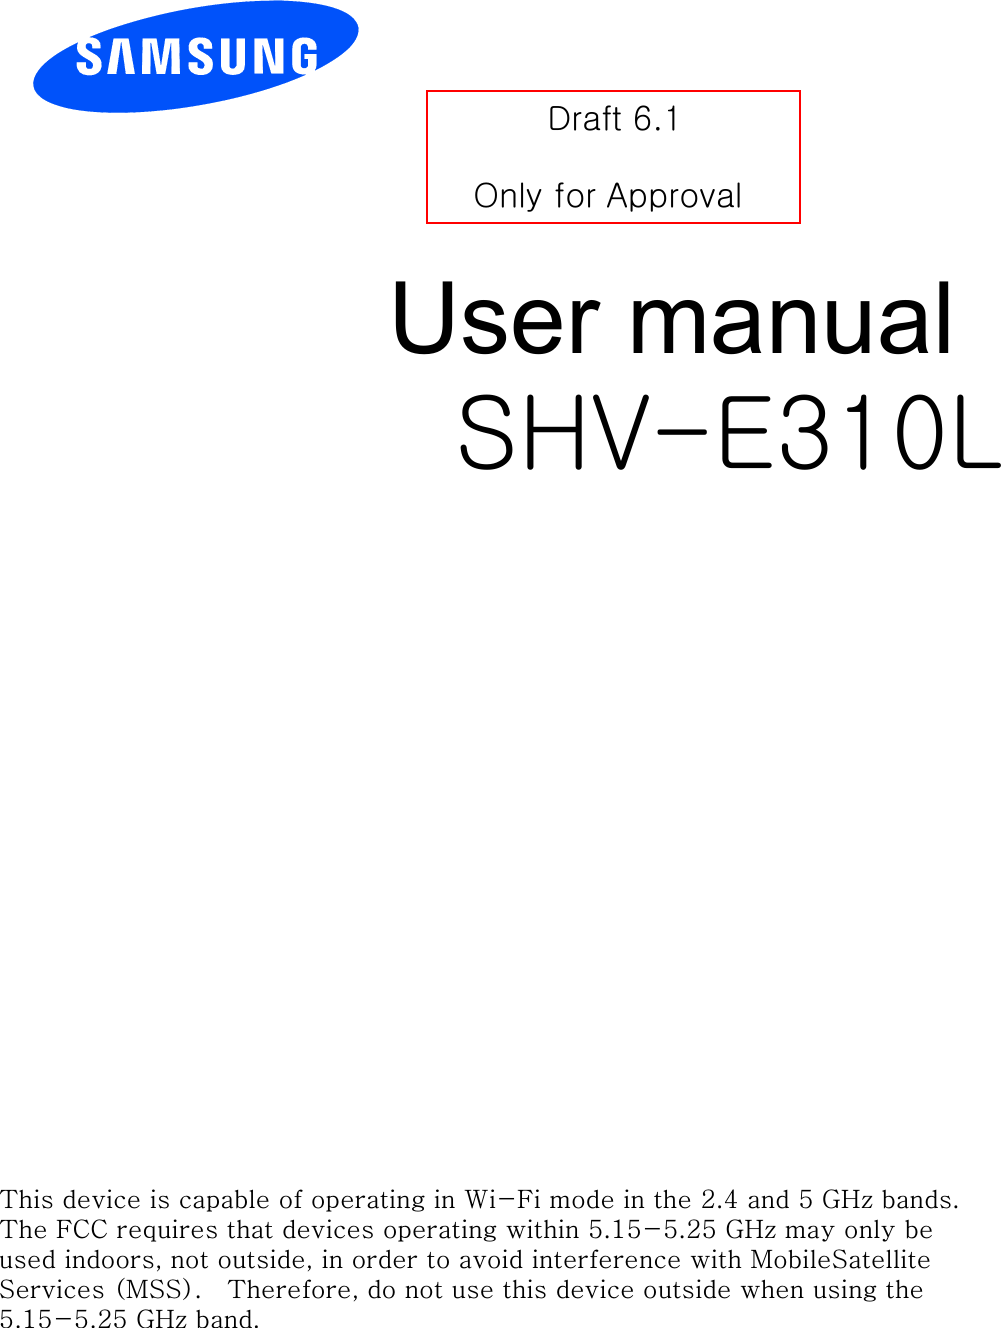 User manual SHV-E310L Draft 6.1 Only for ApprovalThis device is capable of operating in Wi-Fi mode in the 2.4 and 5 GHz bands.  The FCC requires that devices operating within 5.15-5.25 GHz may only be used indoors, not outside, in order to avoid interference with MobileSatellite Services (MSS).   Therefore, do not use this device outside when using the 5.15-5.25 GHz band.